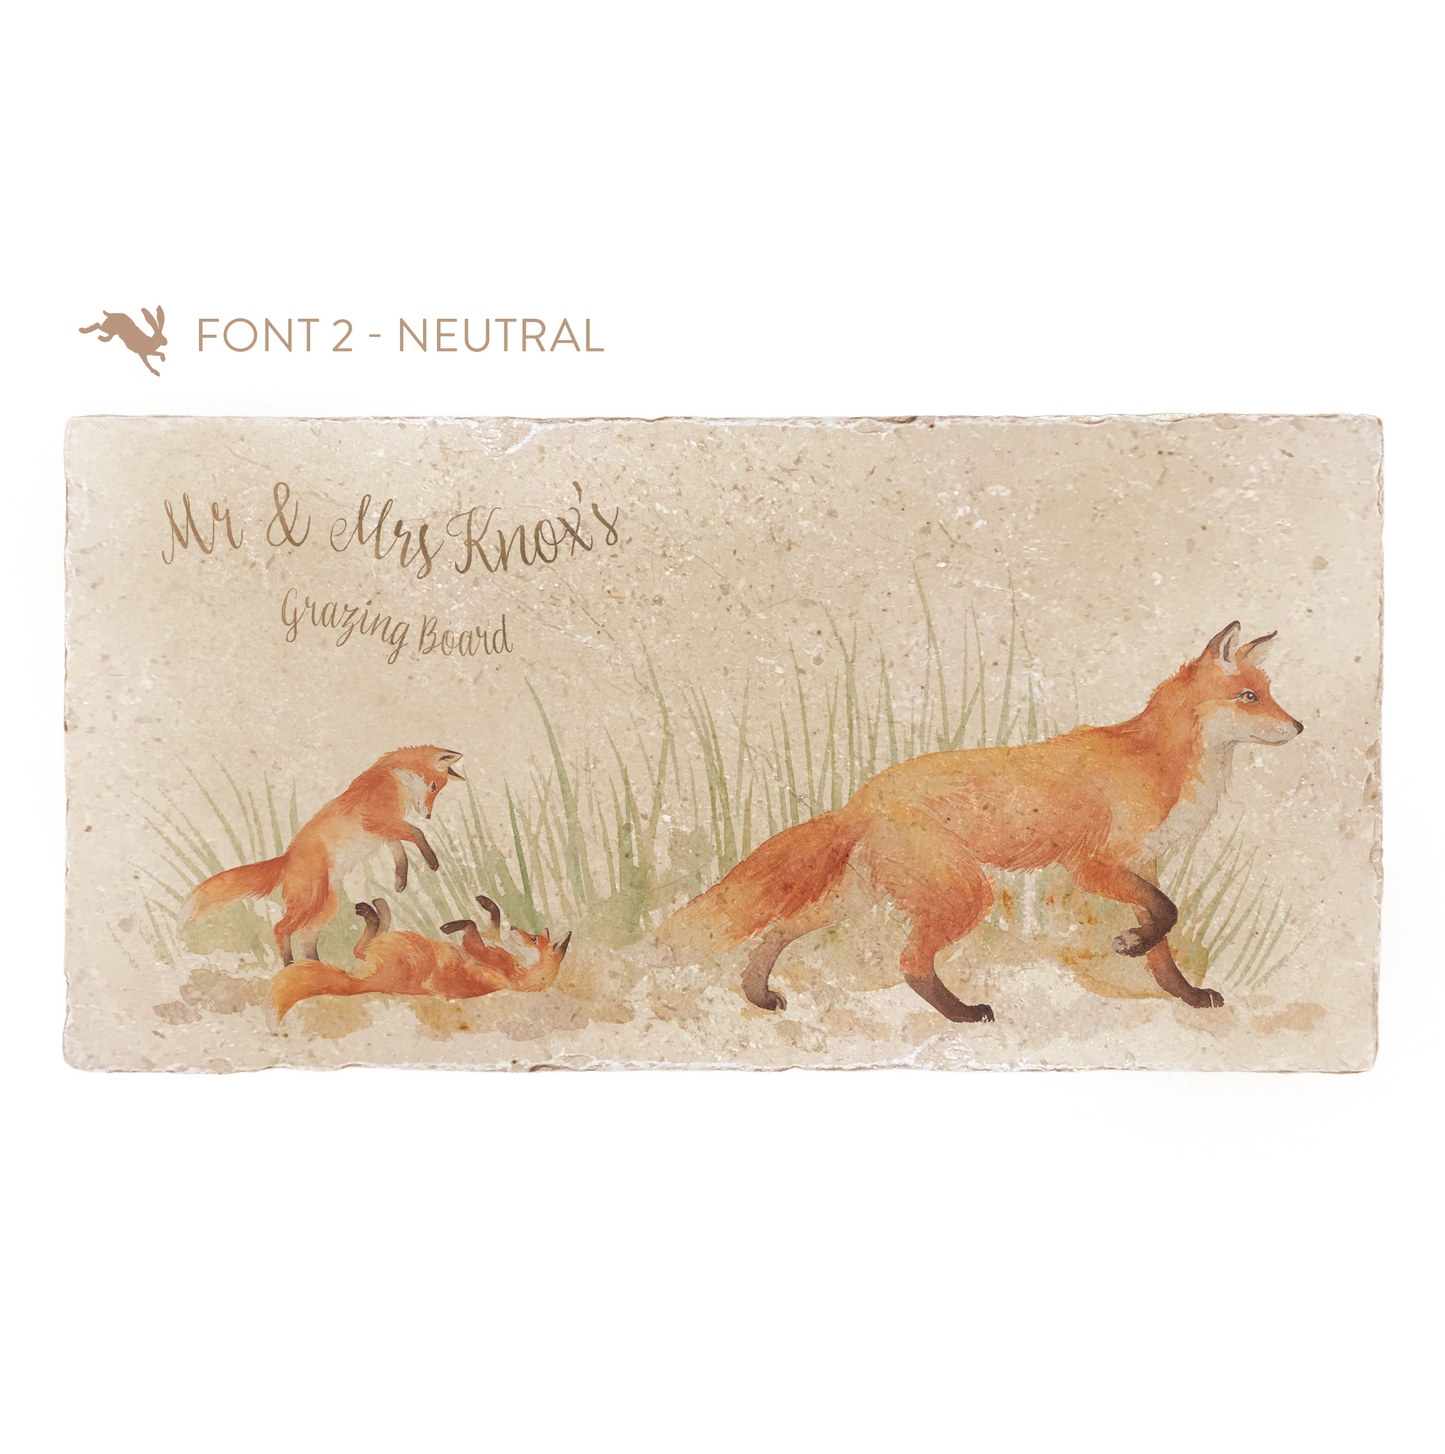 A personalised rectangular marble sharing platter featuring a fox design. The example personalised neutral colour text reads 'Mr & Mrs Knox's Grazing Board'' in an elegant script font.